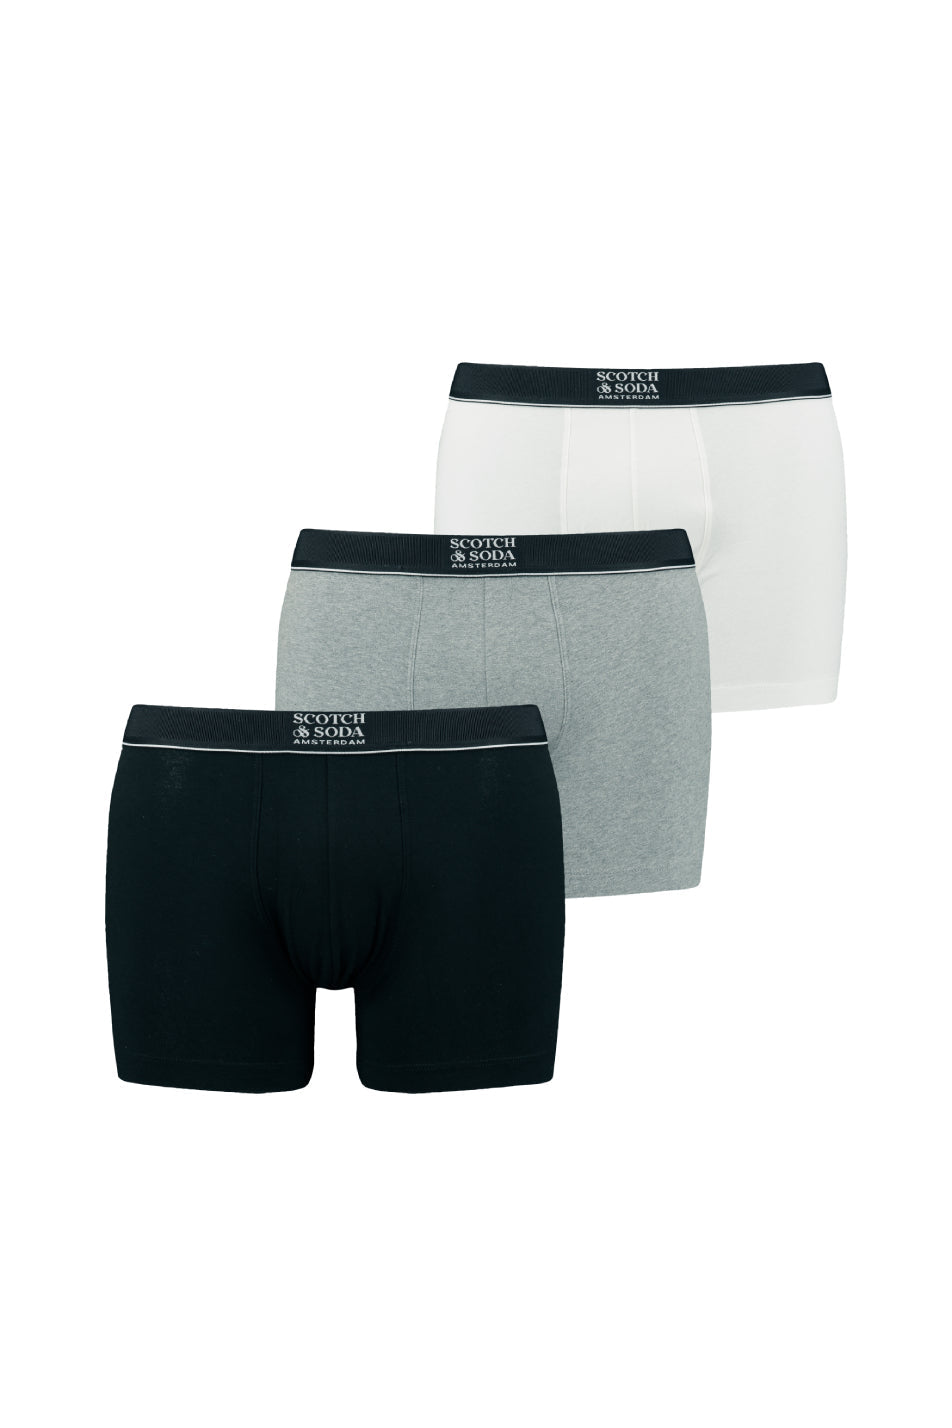 Scotch & Soda 3 Pack Men's Stacked Logo Boxer Brief